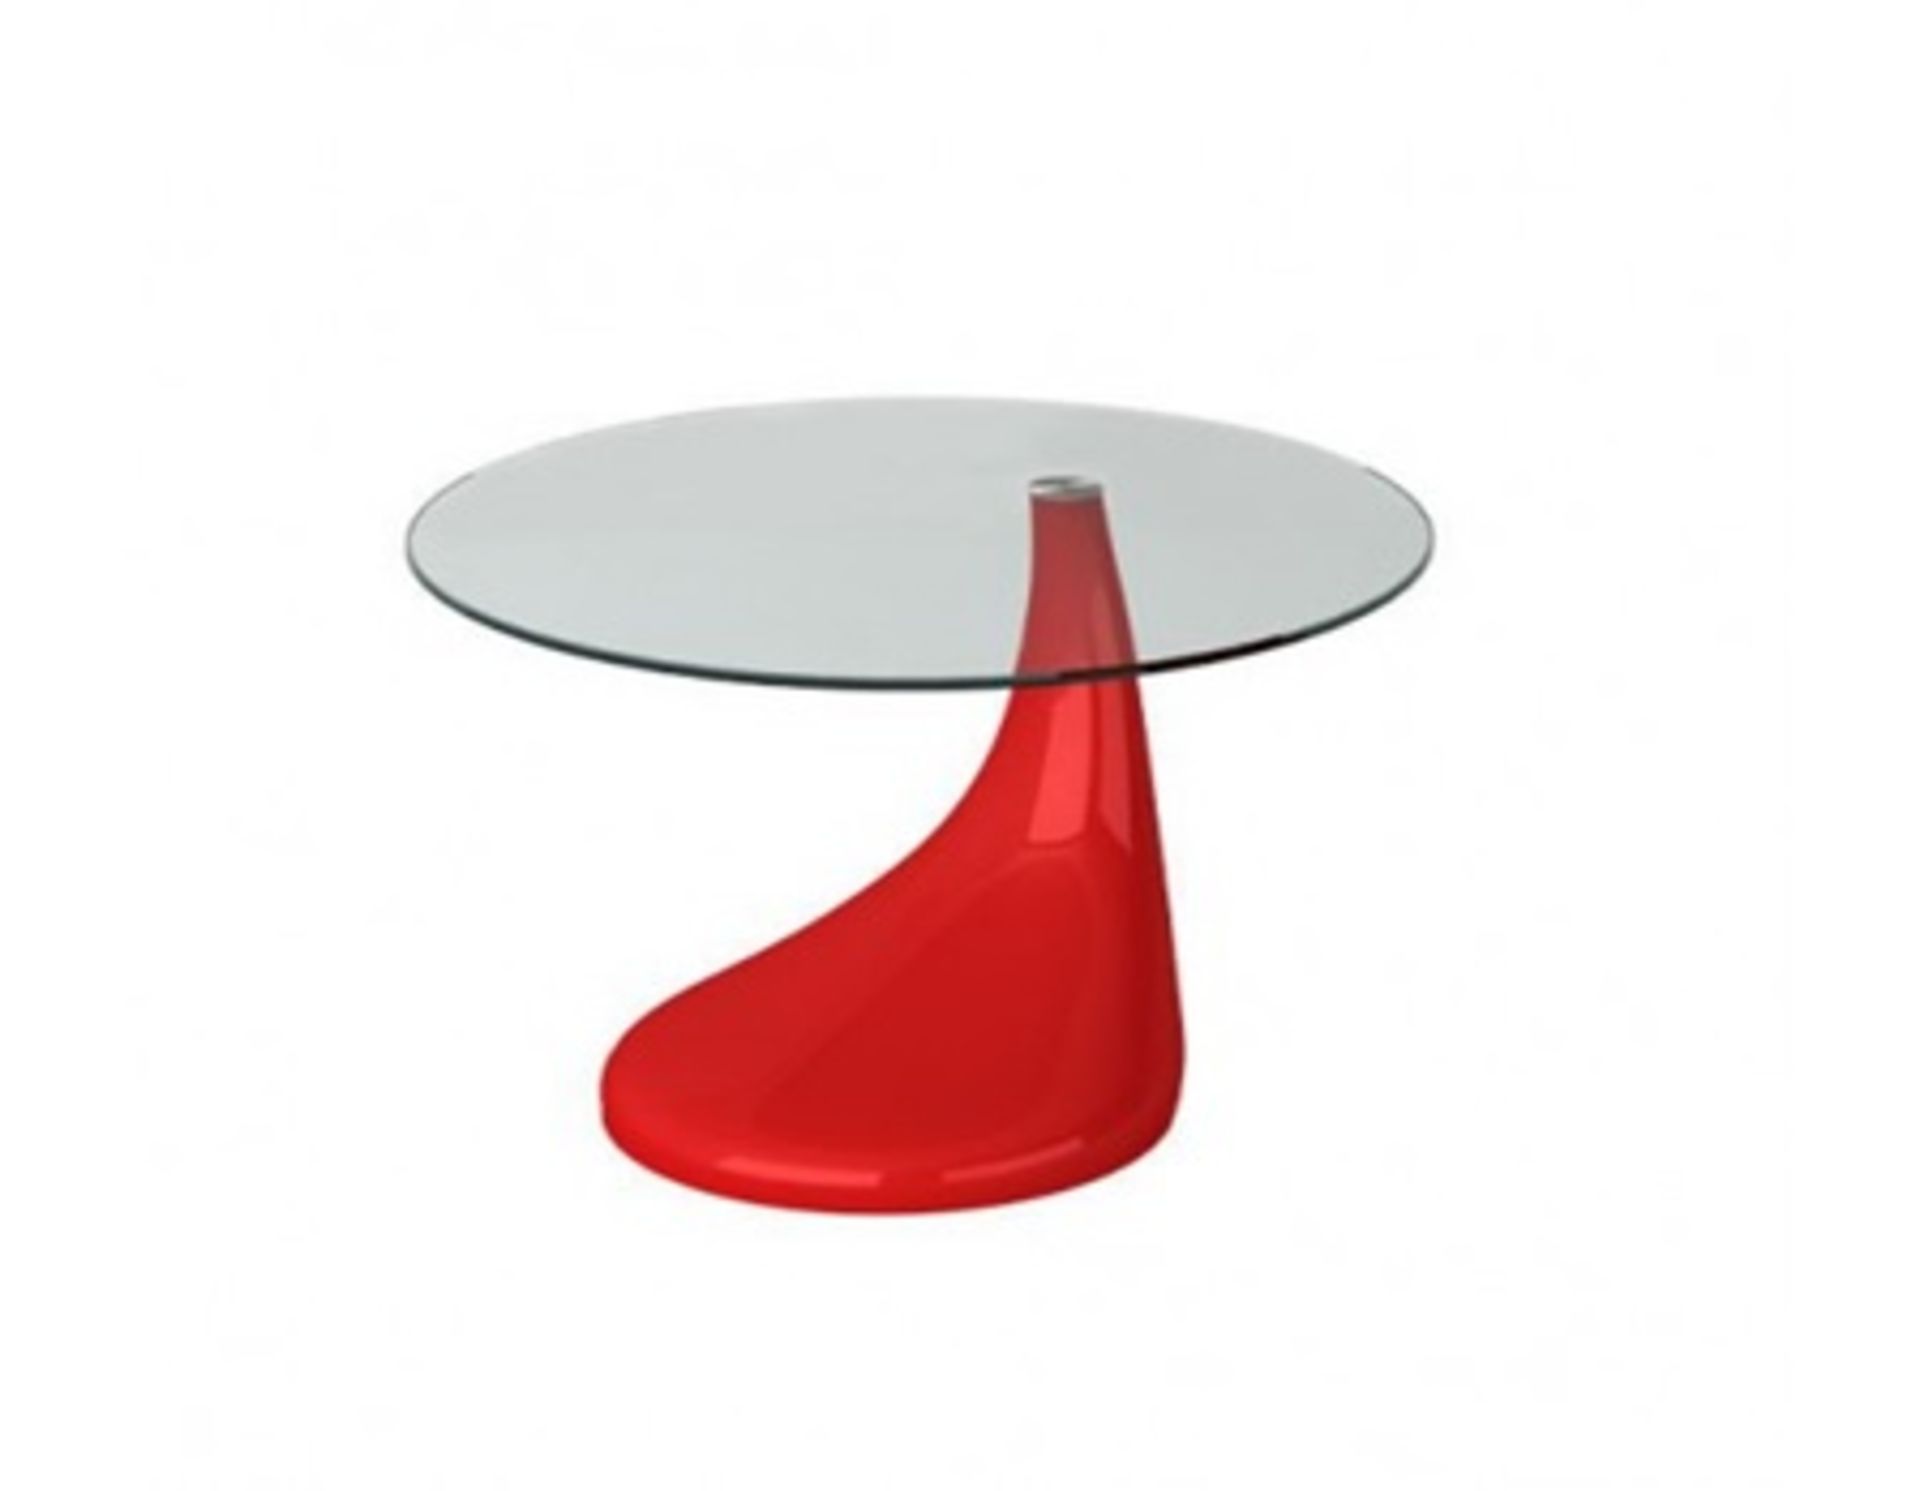 1 BRAND NEW BOXED CONTEMPORARY ROUND HIGH GLOSS COFFEE TABLE/SIDE TABLE IN RED CTB415